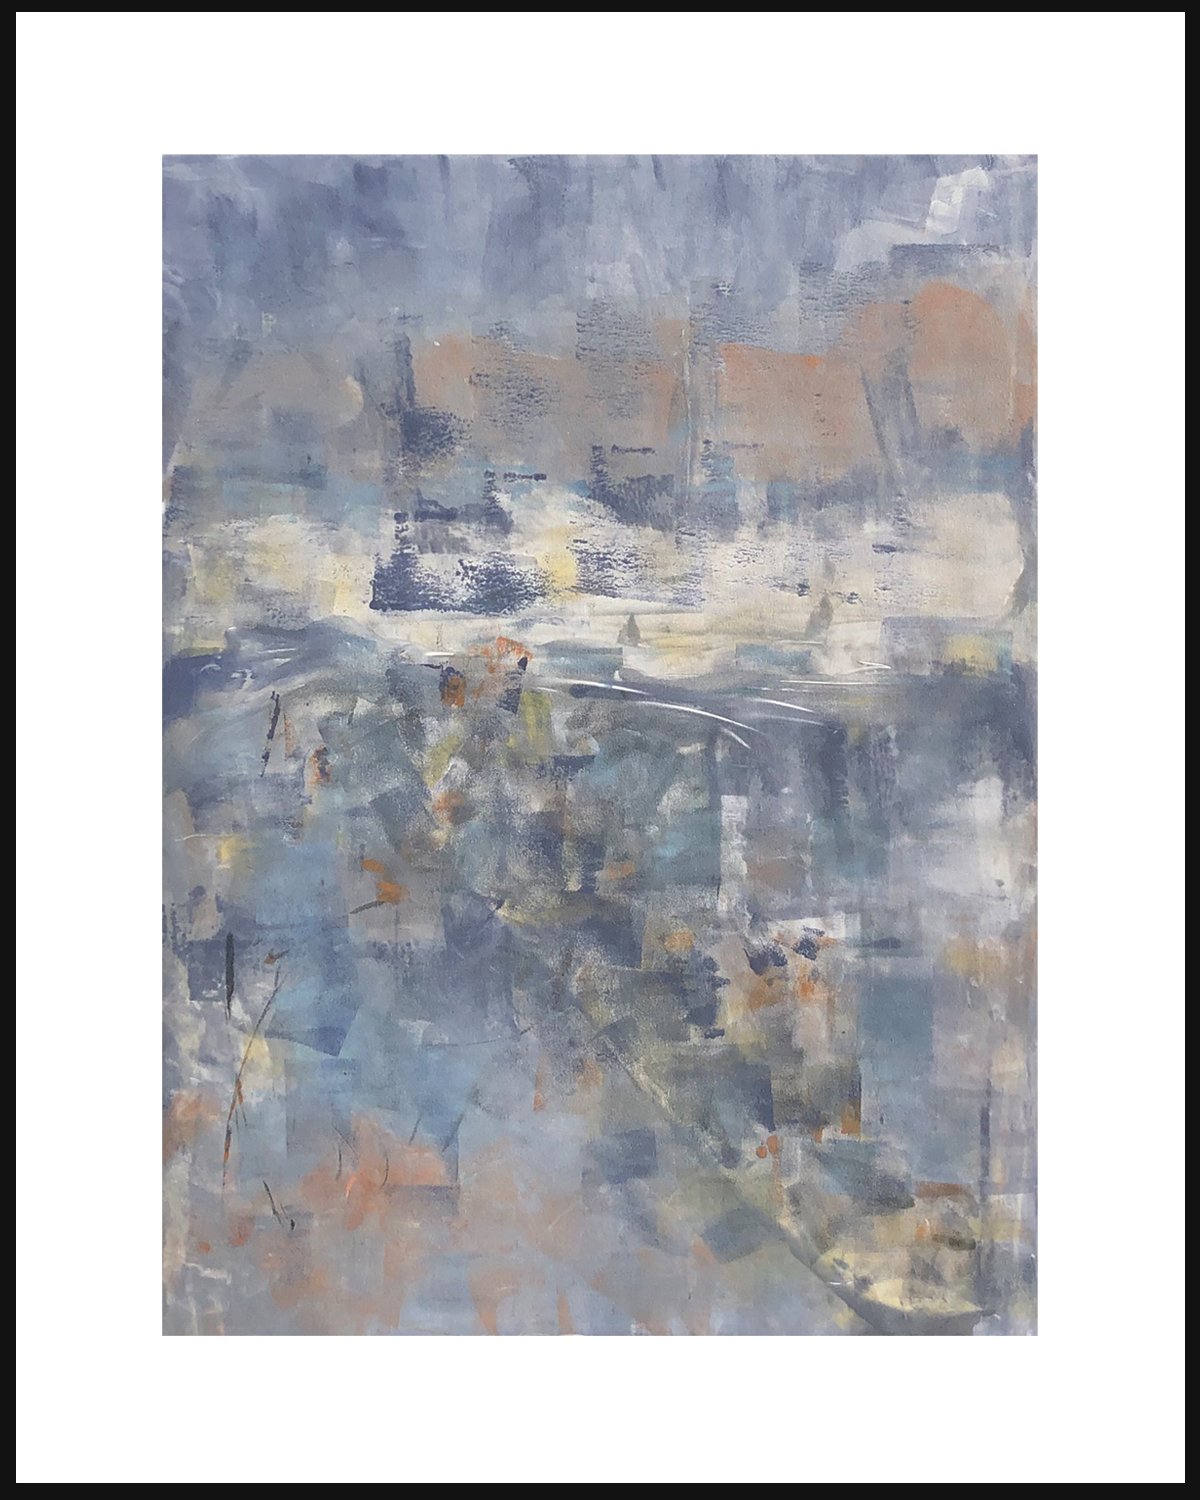    “Coming Home”   …whether it be after a long journey, a time of self discovery or a moment of peace, this print is intended to inspire feelings and conversation of what it means to come home. This is a mixed media monotype print measuring 34 x 25.5